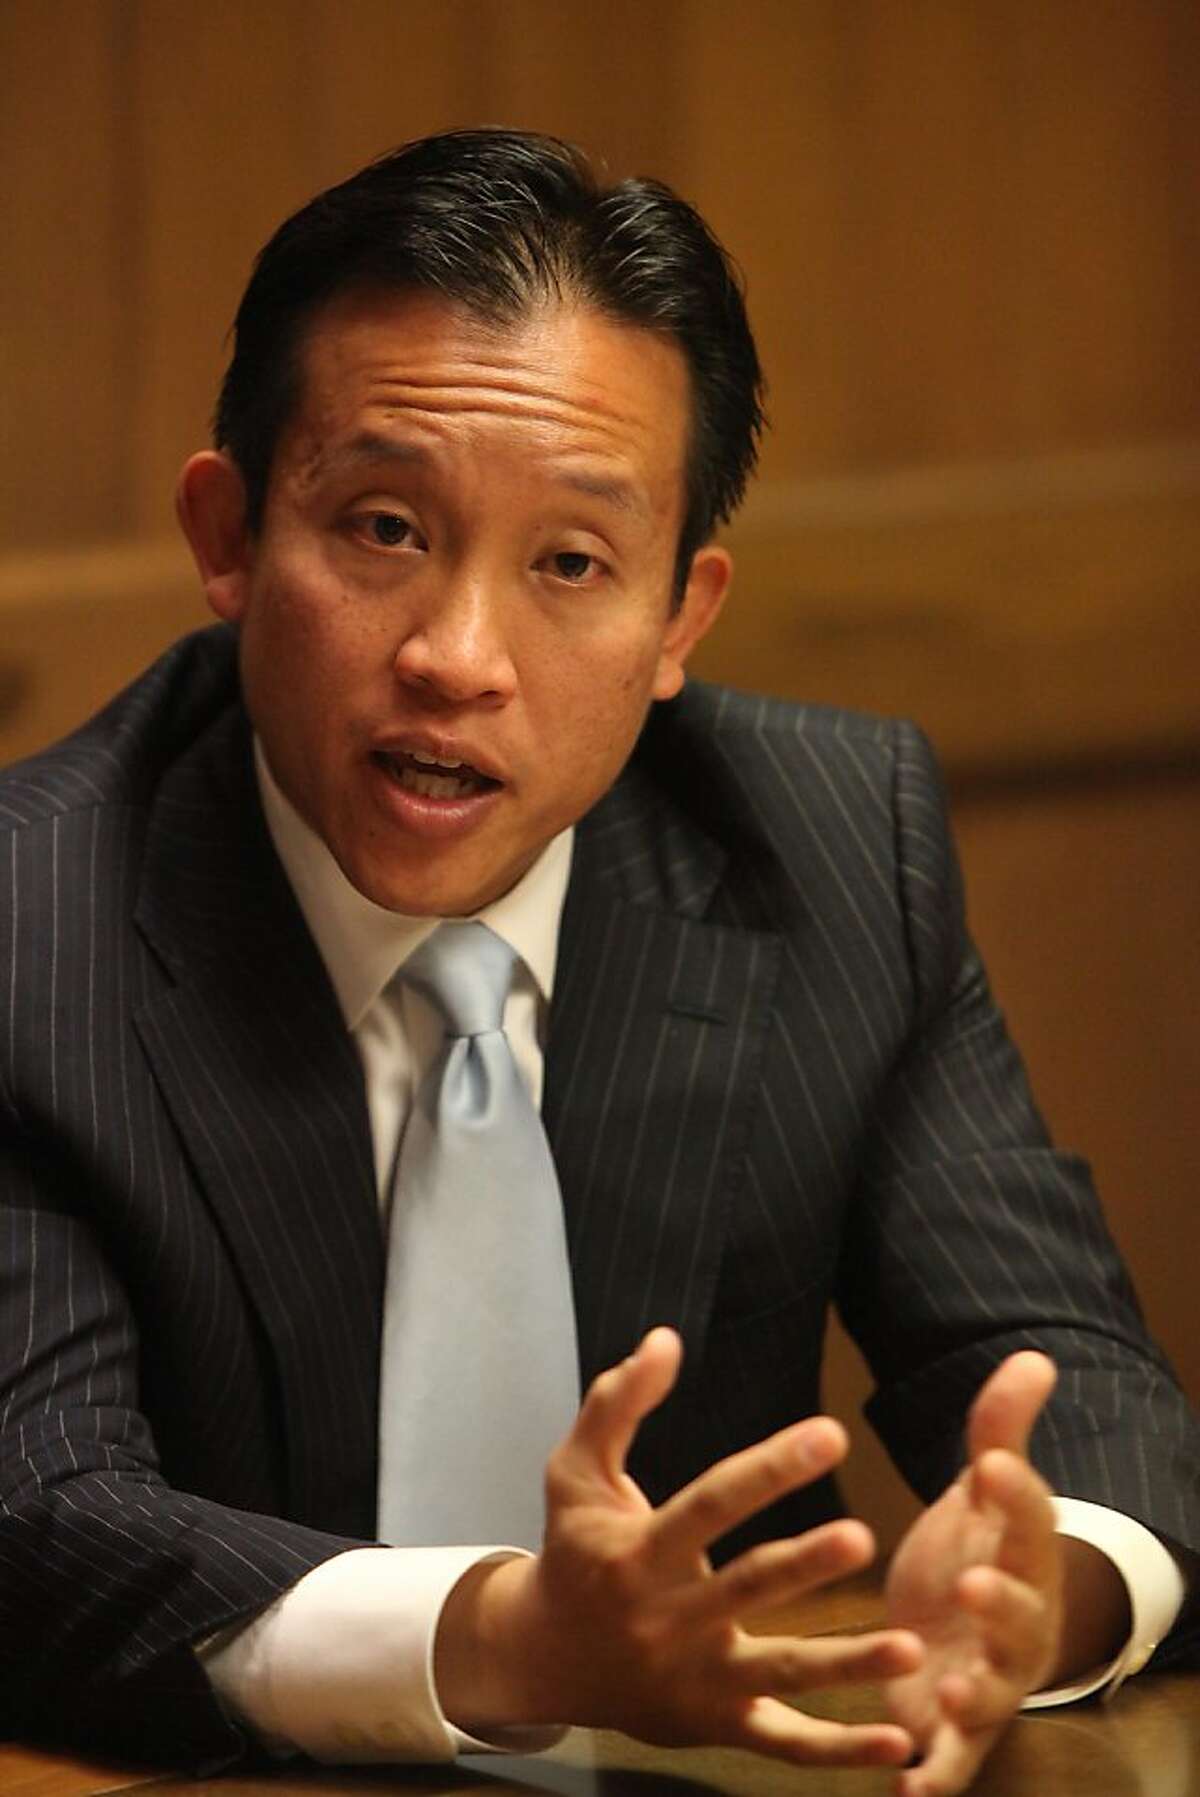 Mayoral candidate David Chiu is seen in San Francisco, Calif., on Thursday, October 6, 2011.